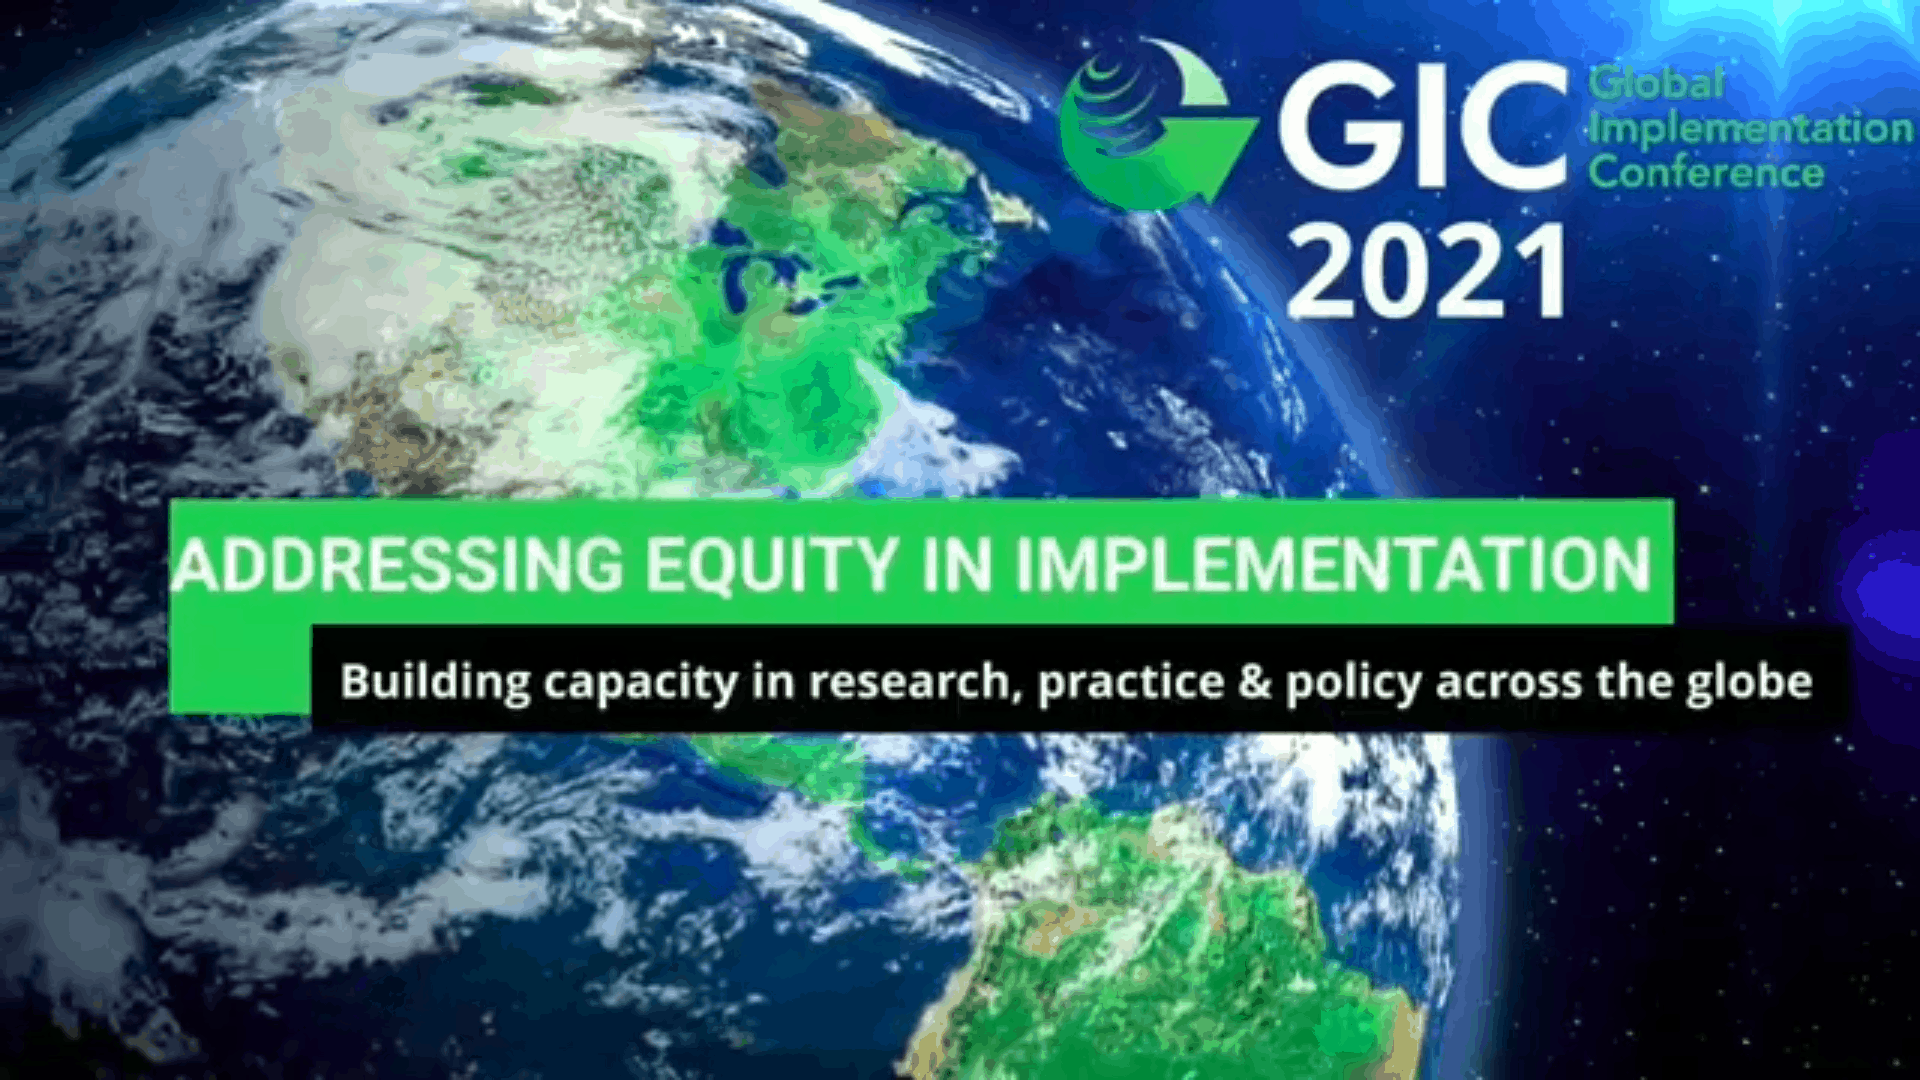 Global Implementation Conference delivers two sessions on